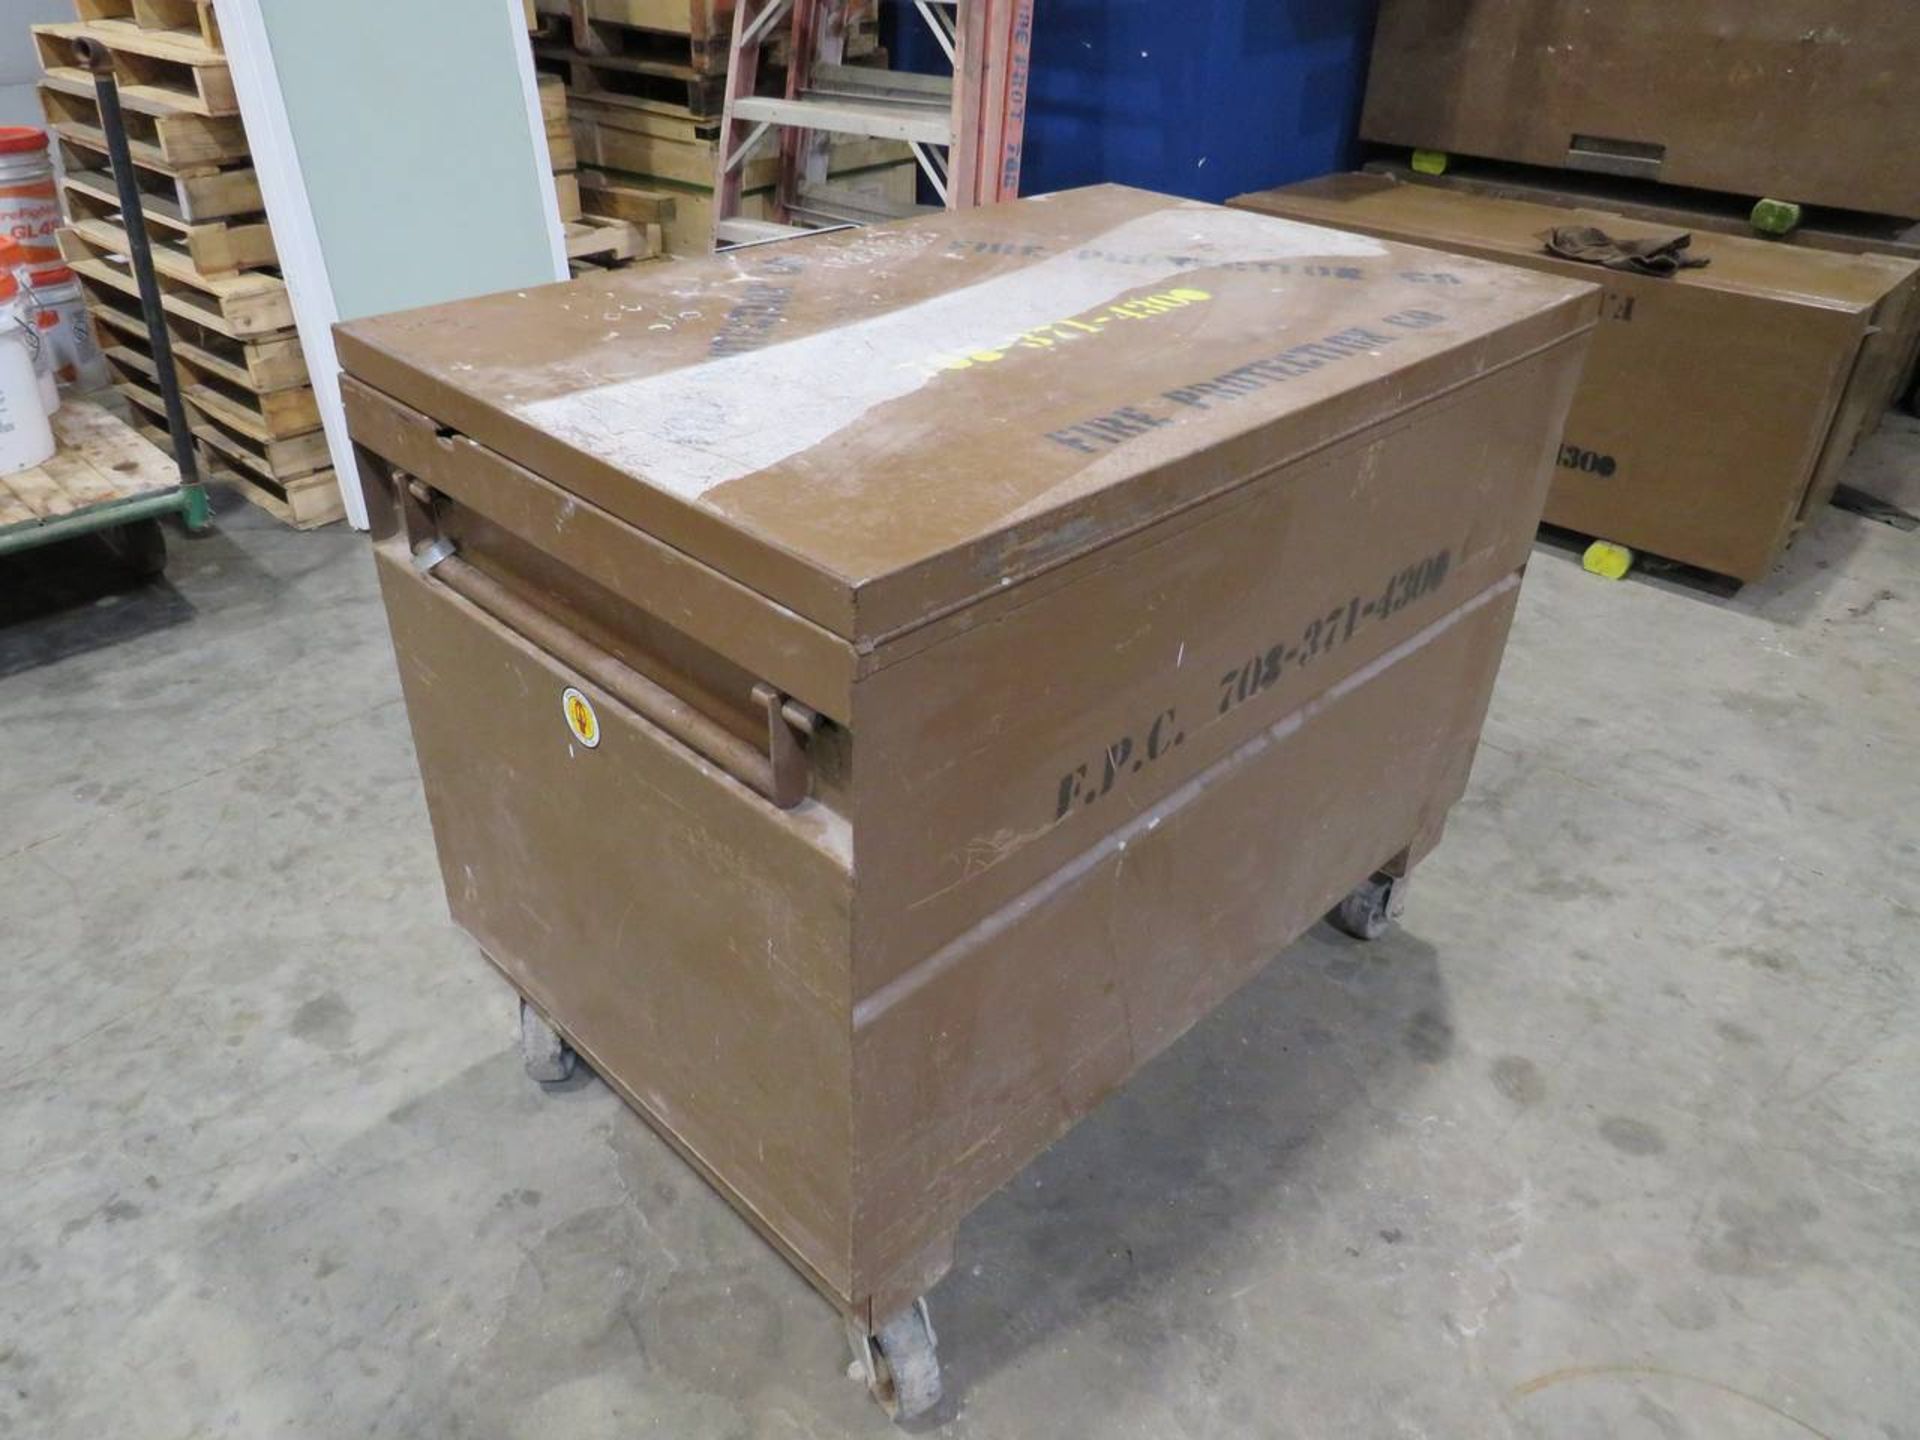 Knaack Approx. 48" W x 30" D x 39-1/2" H Storage Chest - Image 7 of 7